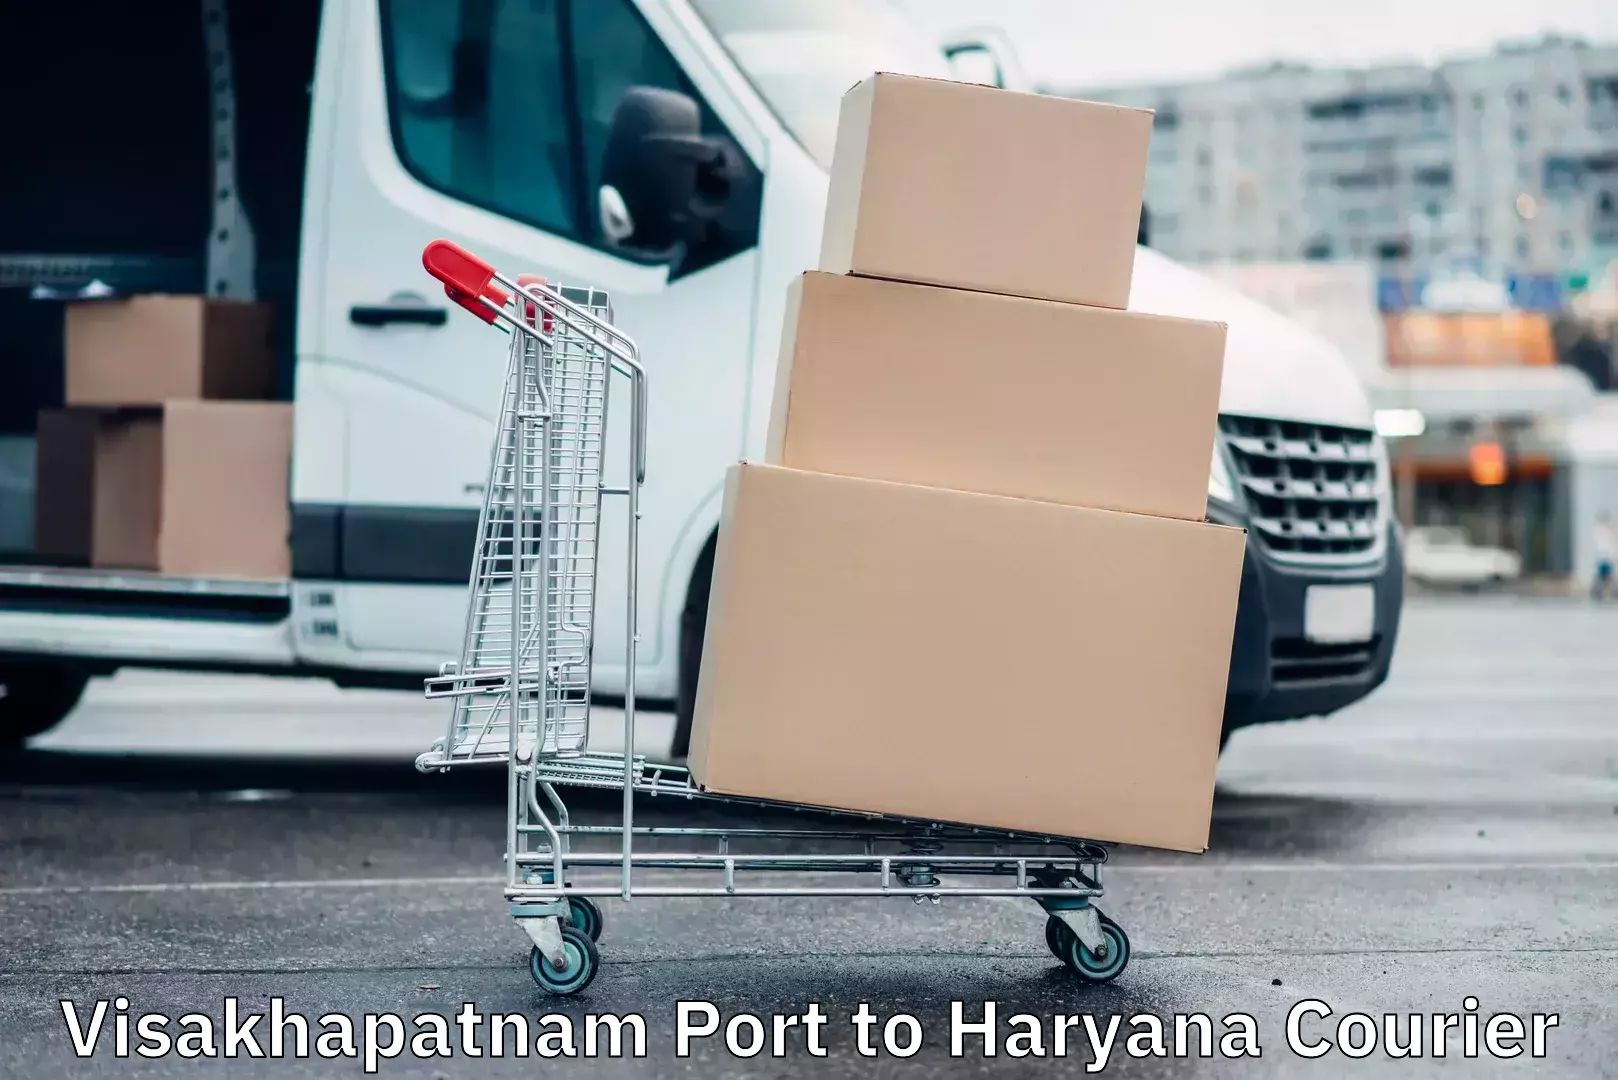 24-hour courier services in Visakhapatnam Port to Haryana